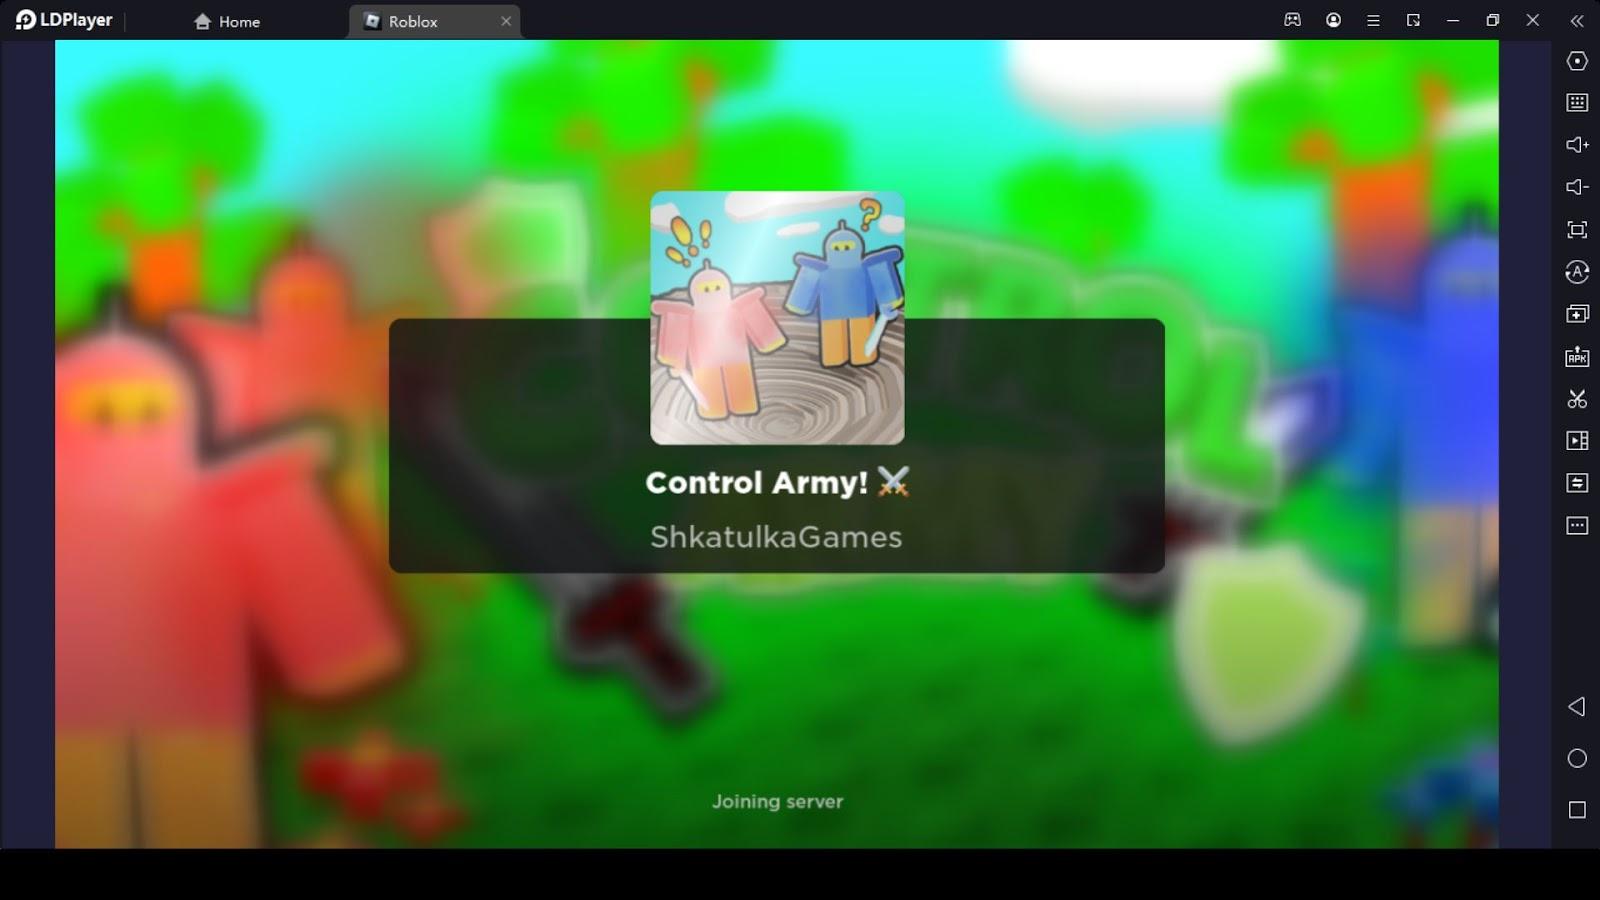 Roblox Control Army Redeem Codes: Enhance Your Gaming Adventure in